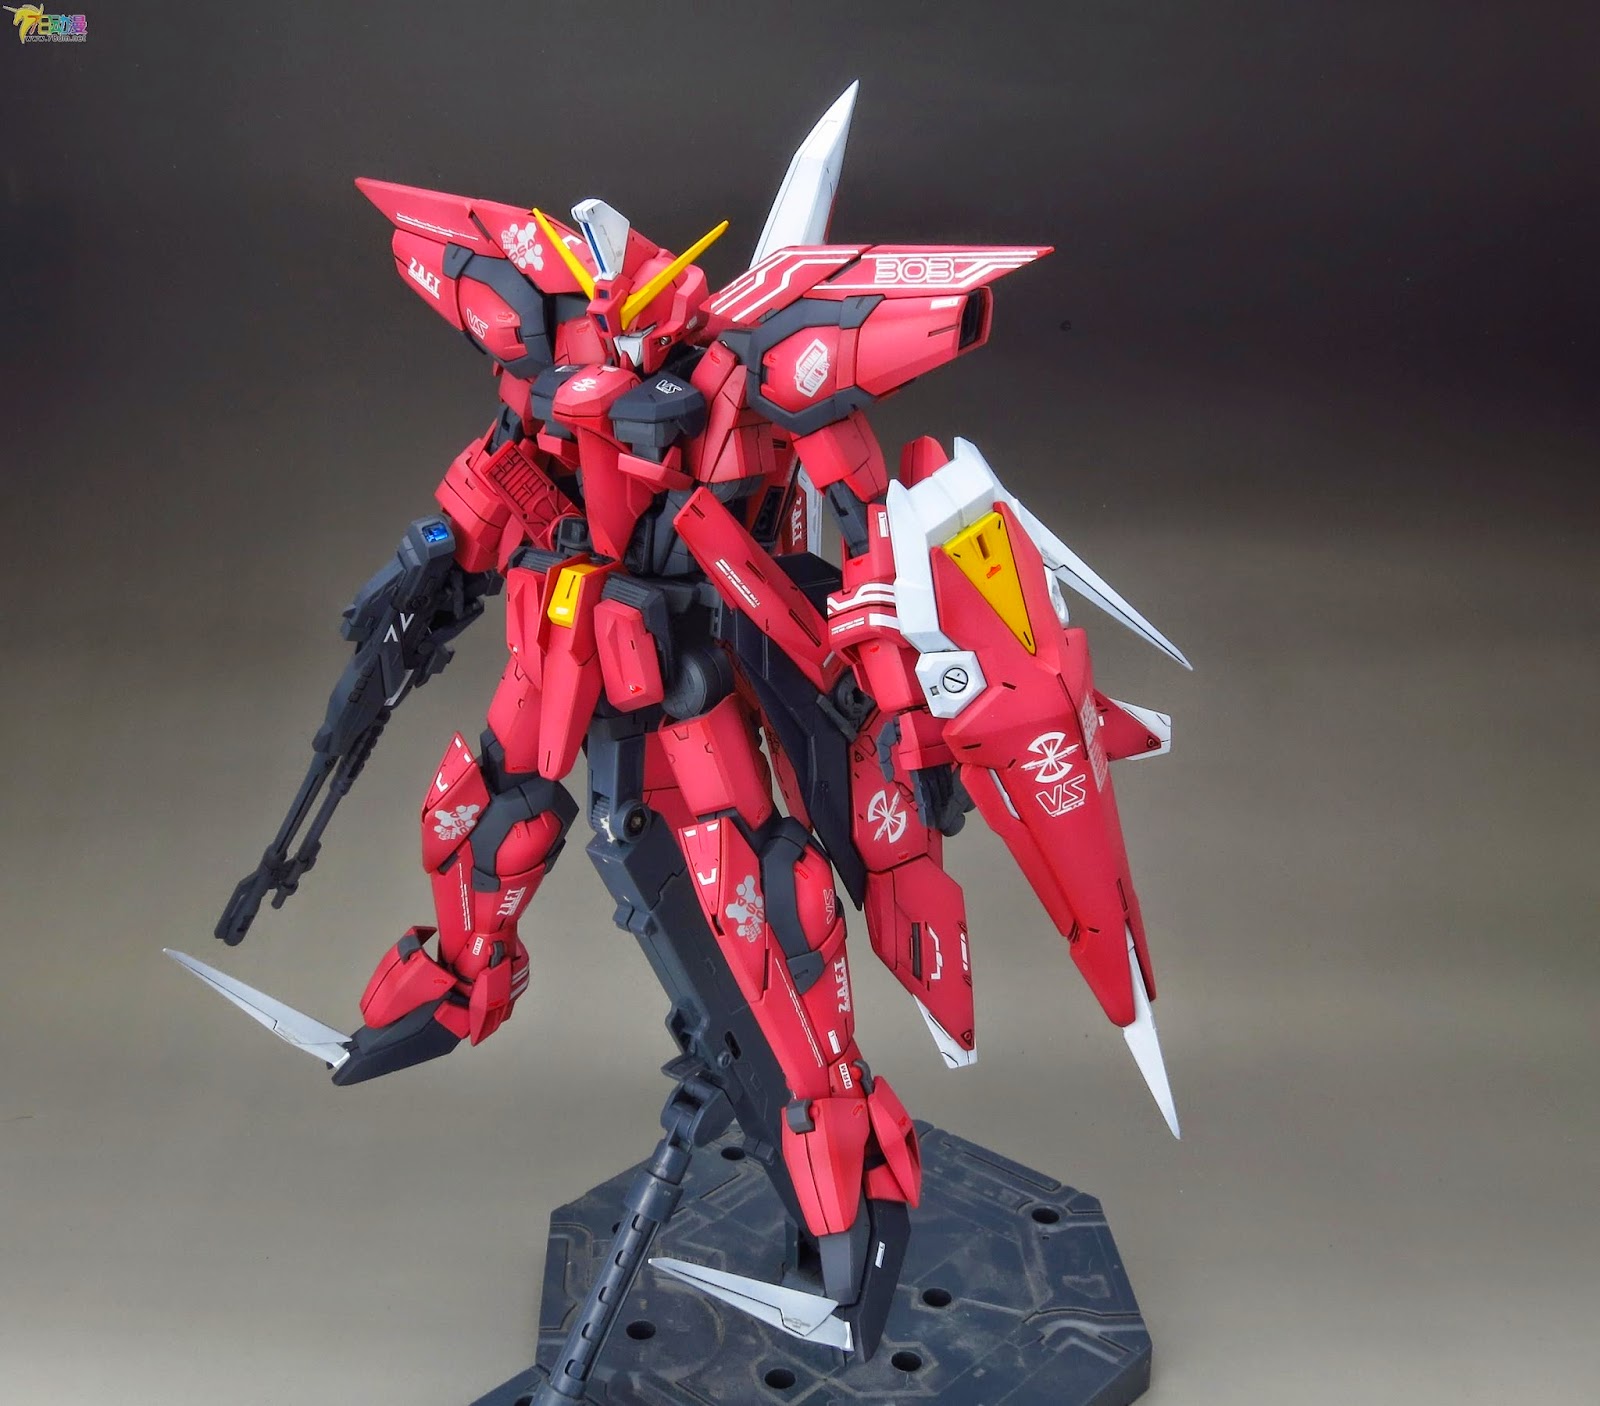 HG 1/144 and SD GAT-X303 Aegis Gundam painted build by 